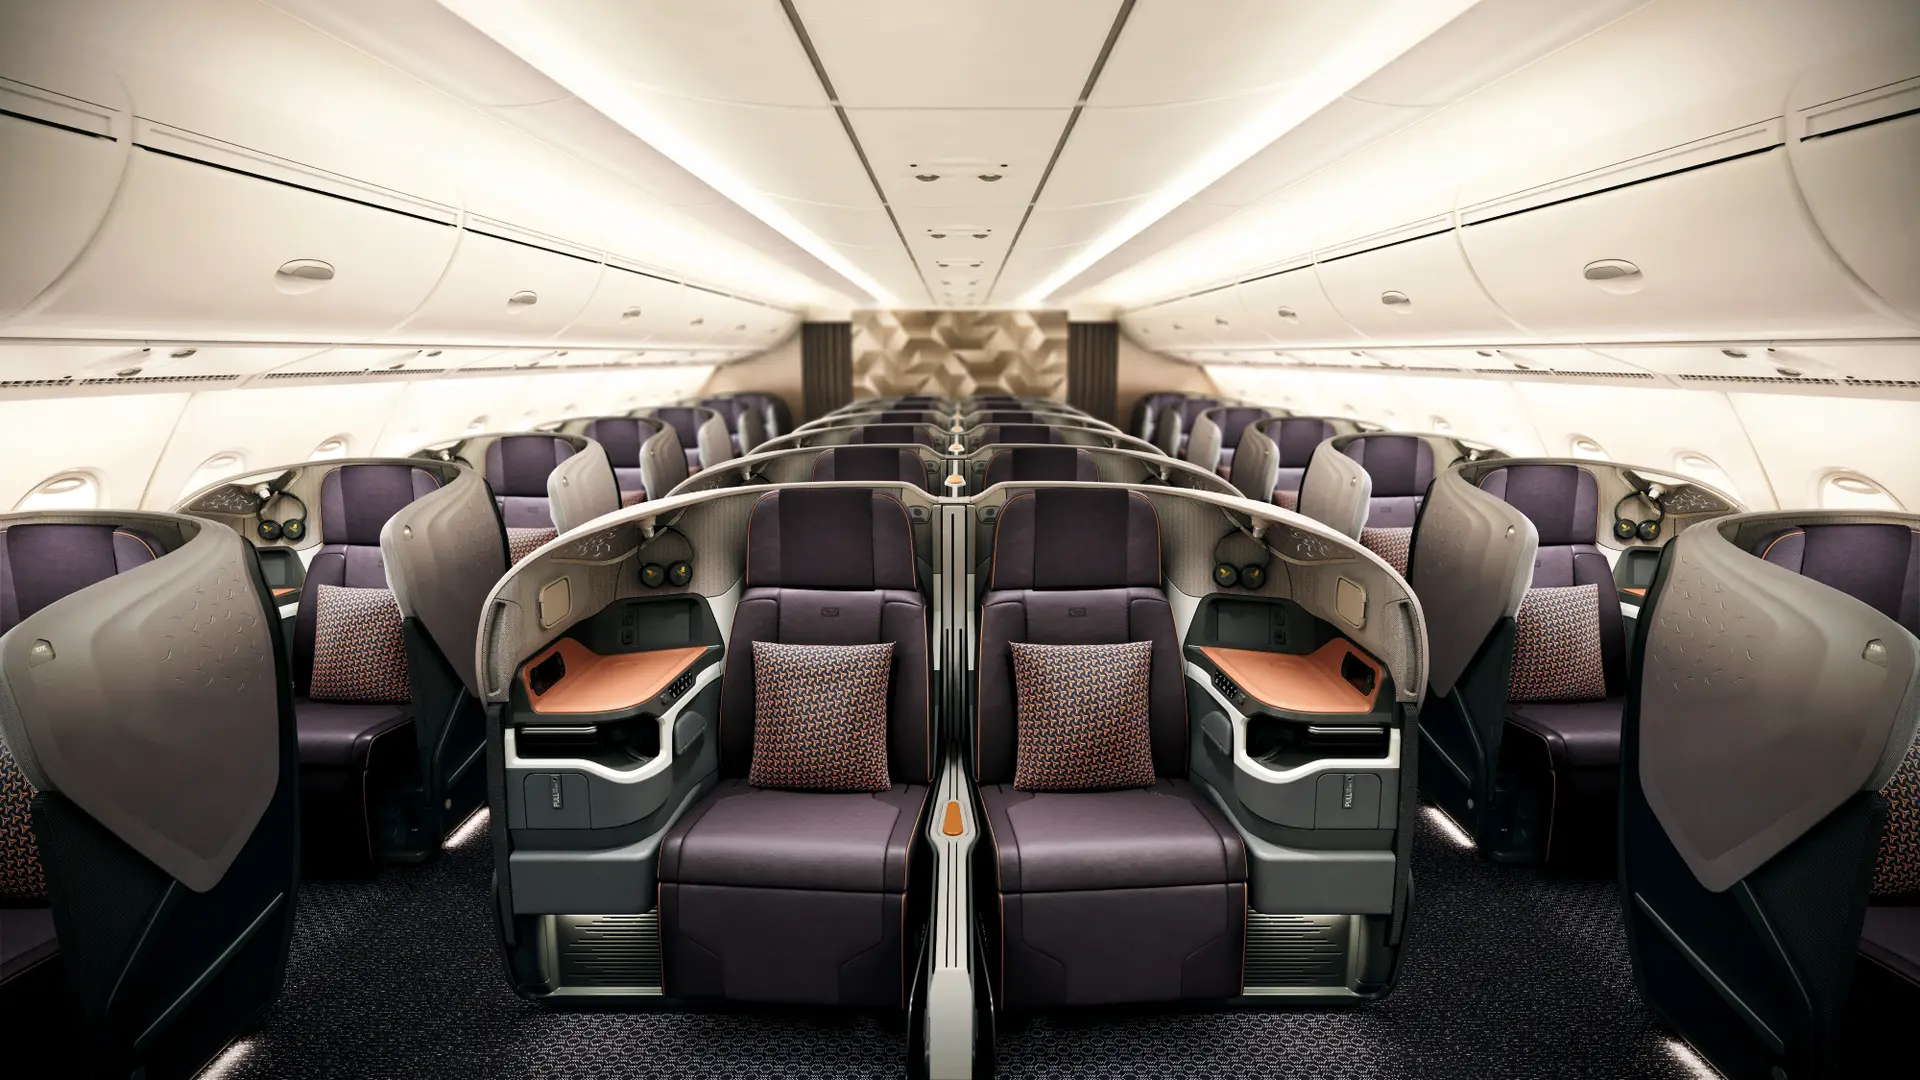 Singapore Airlines Business Class on the A380